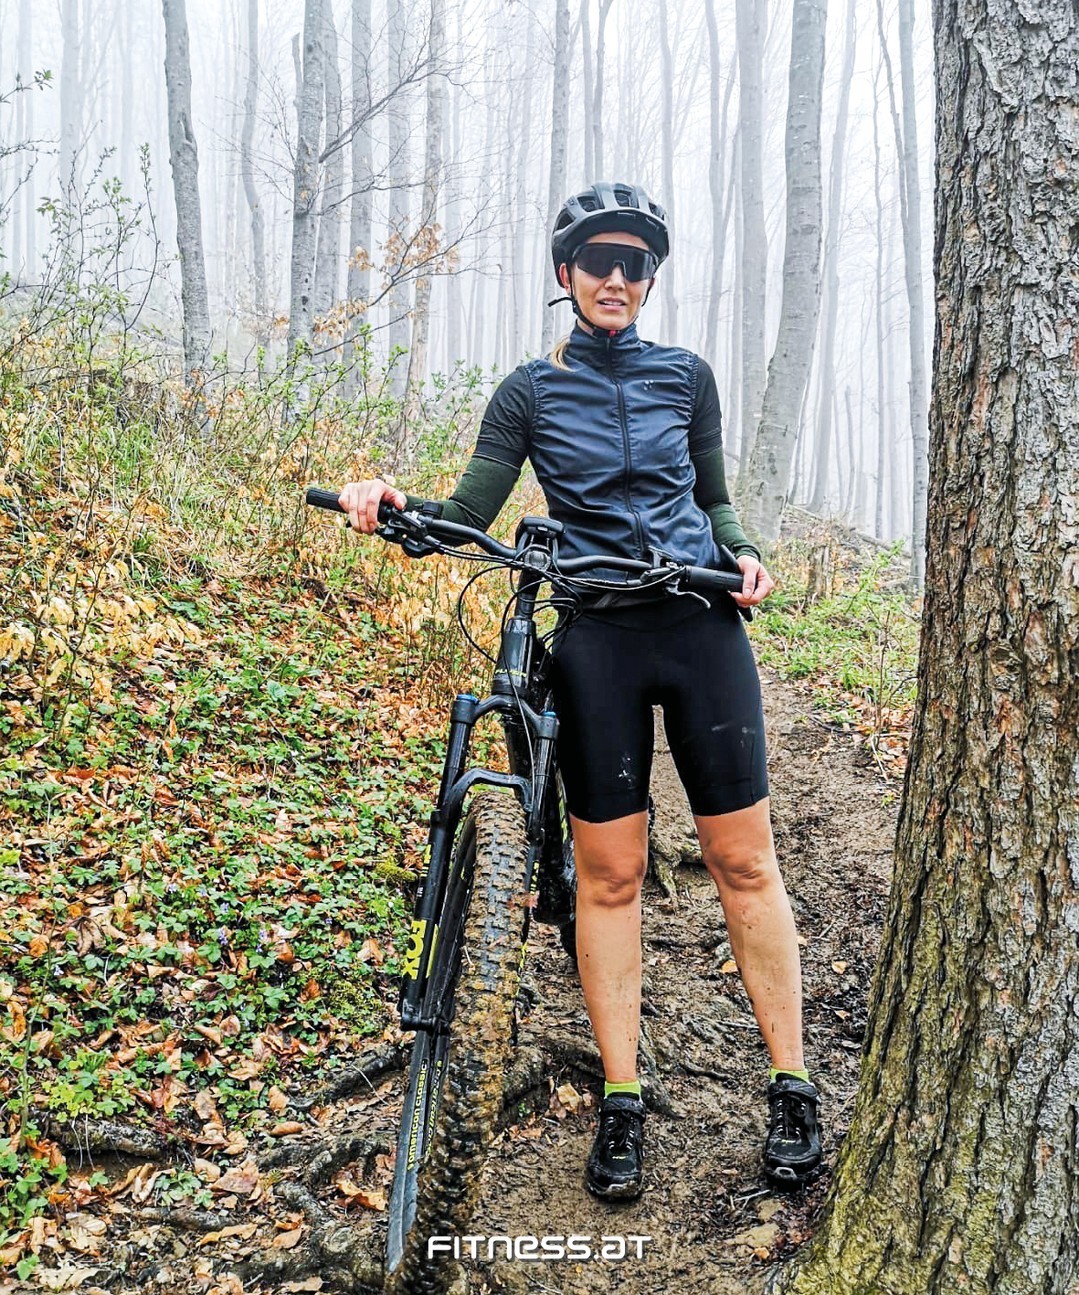 Scared? Good!
We don´t grow when we stay inside our comfort zone 💪🚴‍♀️. 

 📷 @_danifee_
📍 in the woods

#fitnessat #weilwirfitnessleben #feelit #nature #outdoor #fun #wood #wald #natur #feelfree #austria #view #beautiful #bicycle #ride #moments #motivation #sport #fitness #stayfit #feelgood #youcan #bestrong #strong